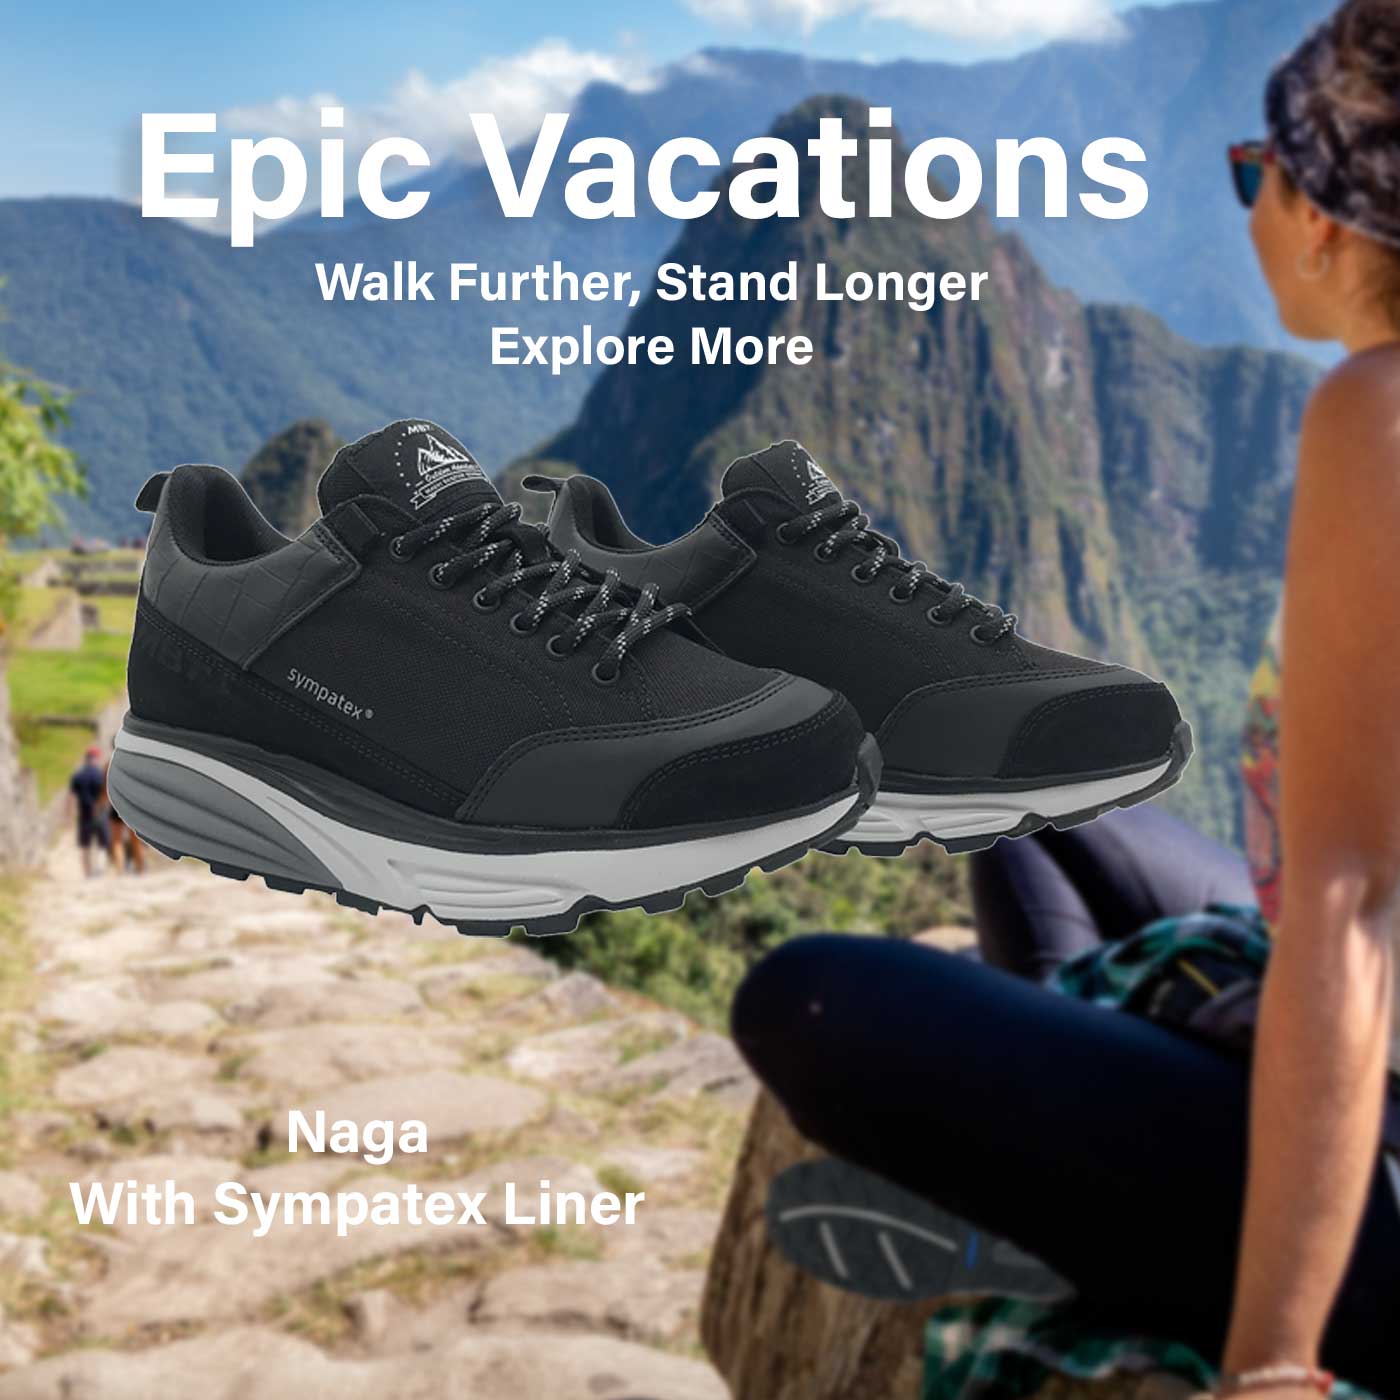 Epic Vacations. Walk Further, Stand Longer, Explore More. Shop Waterproof Walking Shoes